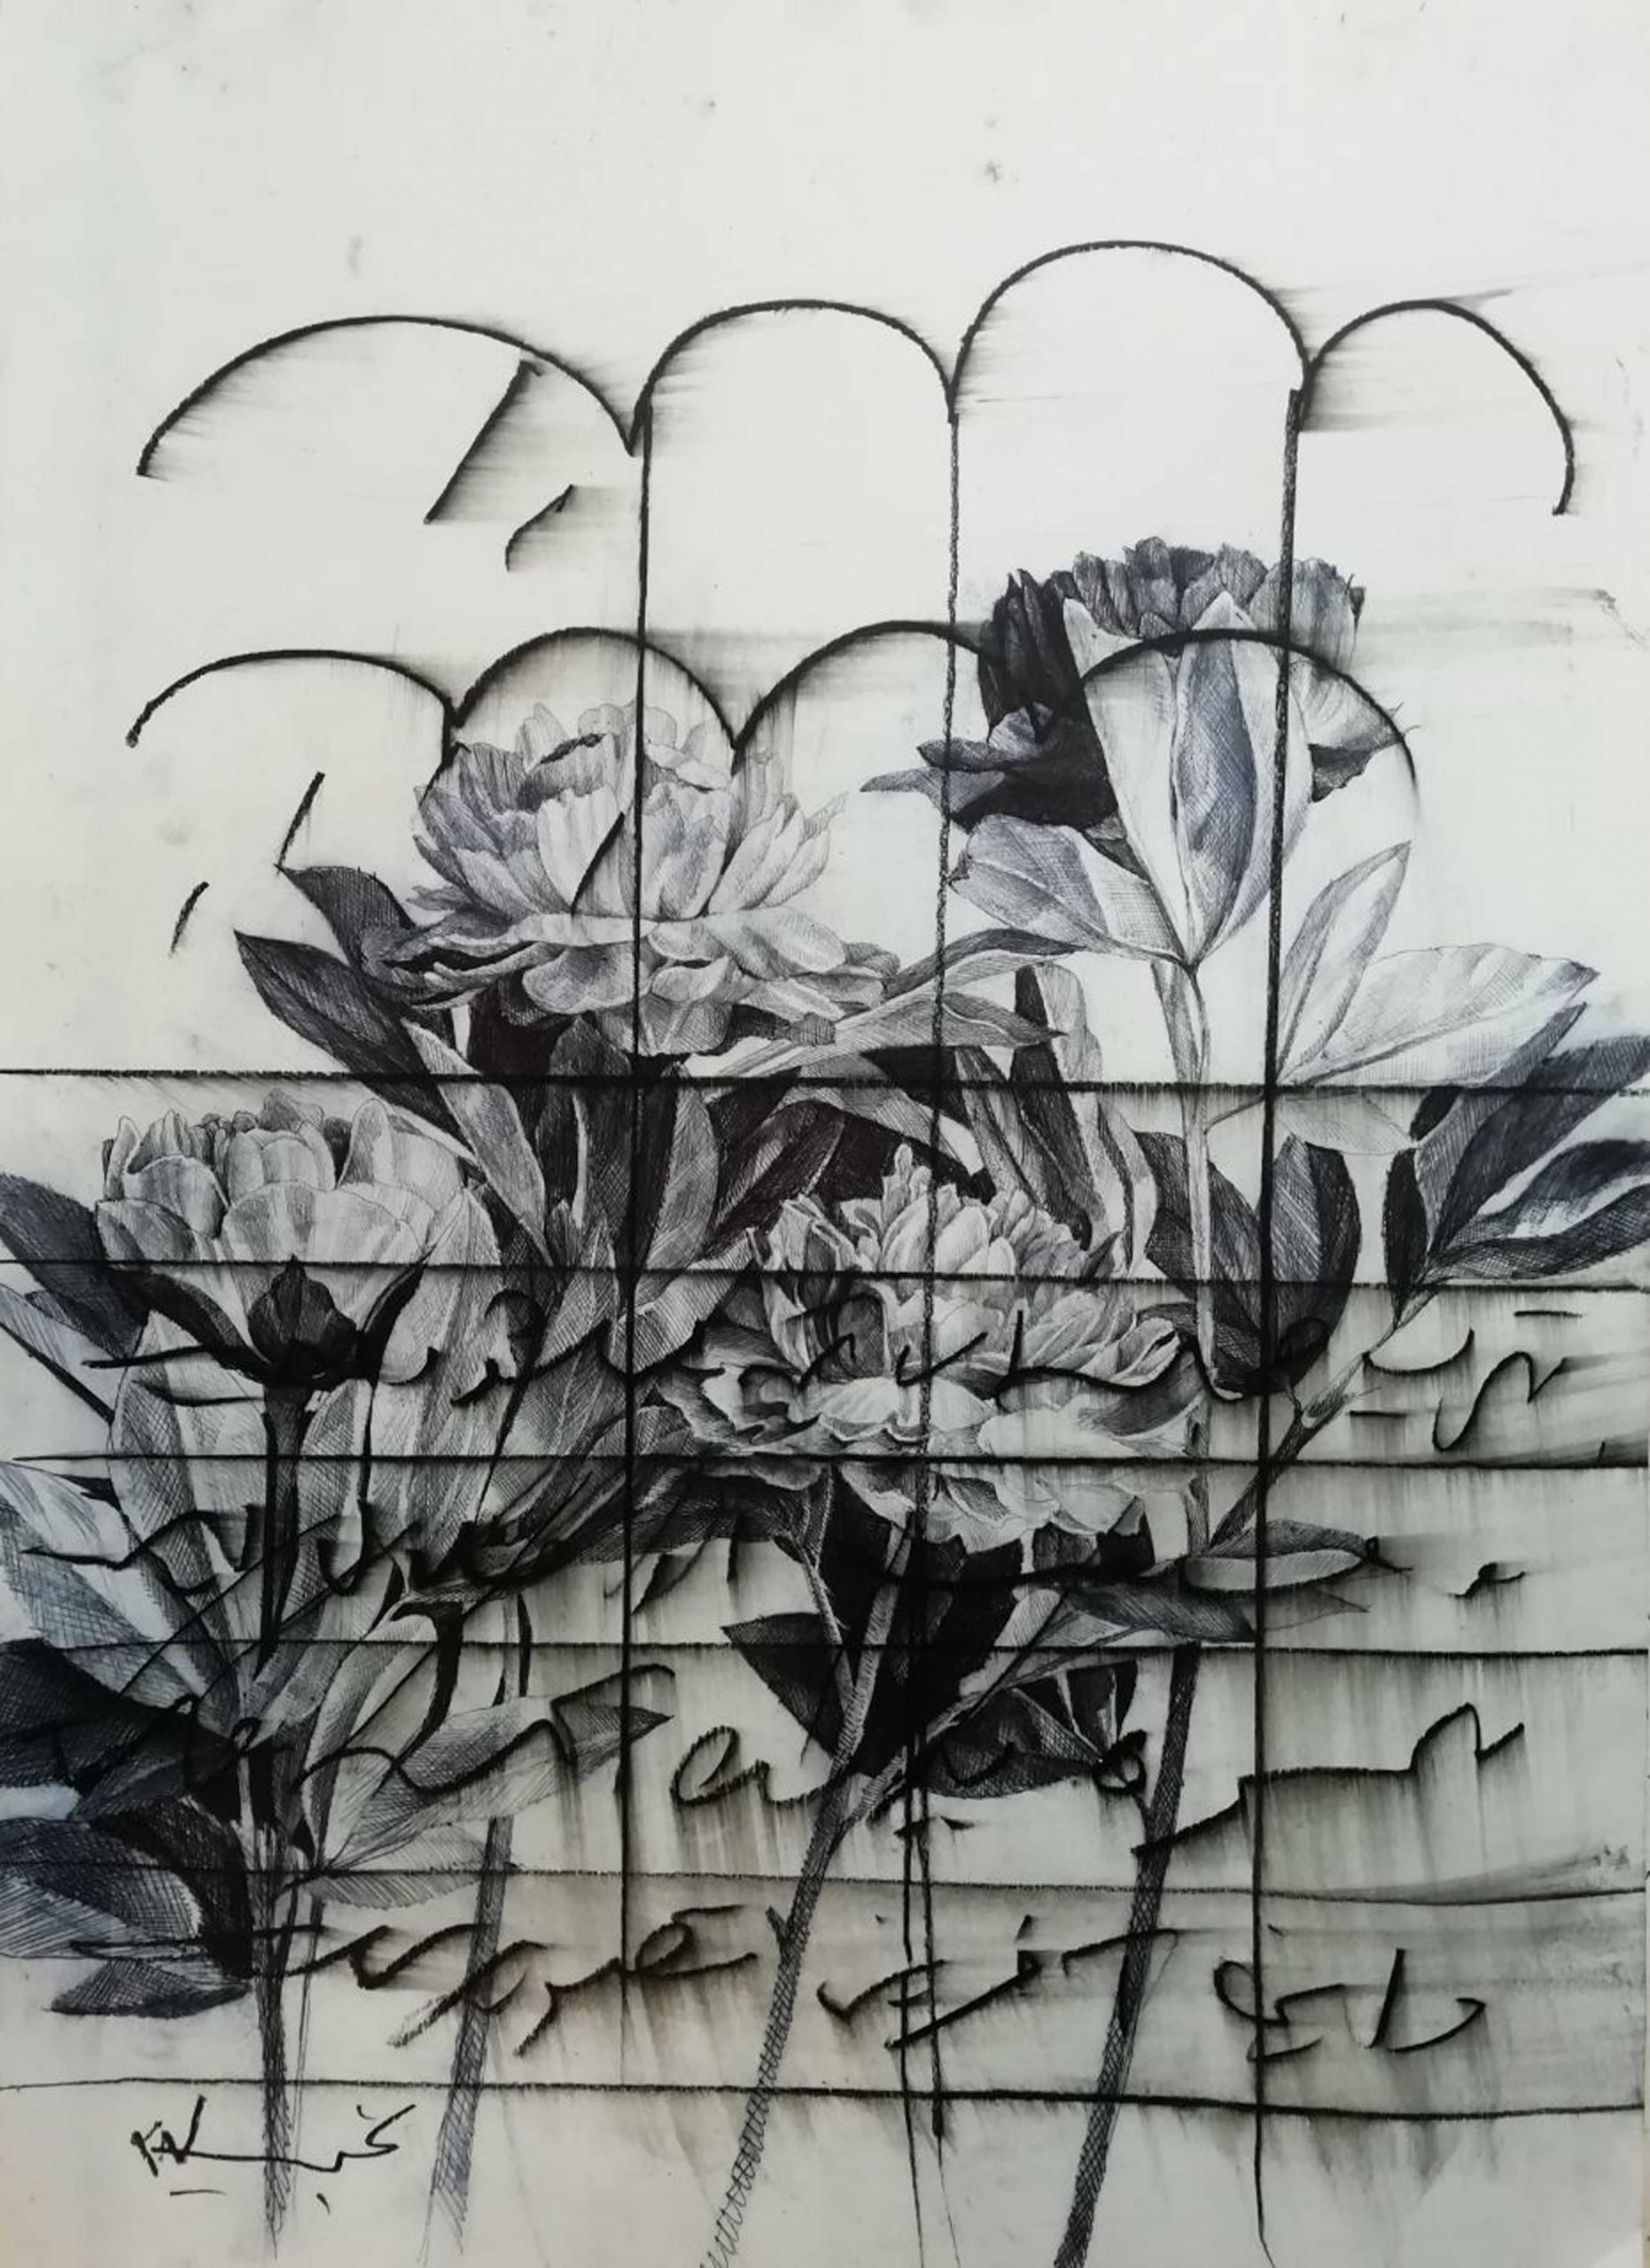 01 Hossein Tamjid 50.70 Cm Pen and Pencil on Cardboard 2019 scaled - Ten Days Like Flower  | Group Exhibition - Ten Days Like Flower  | Group Exhibition